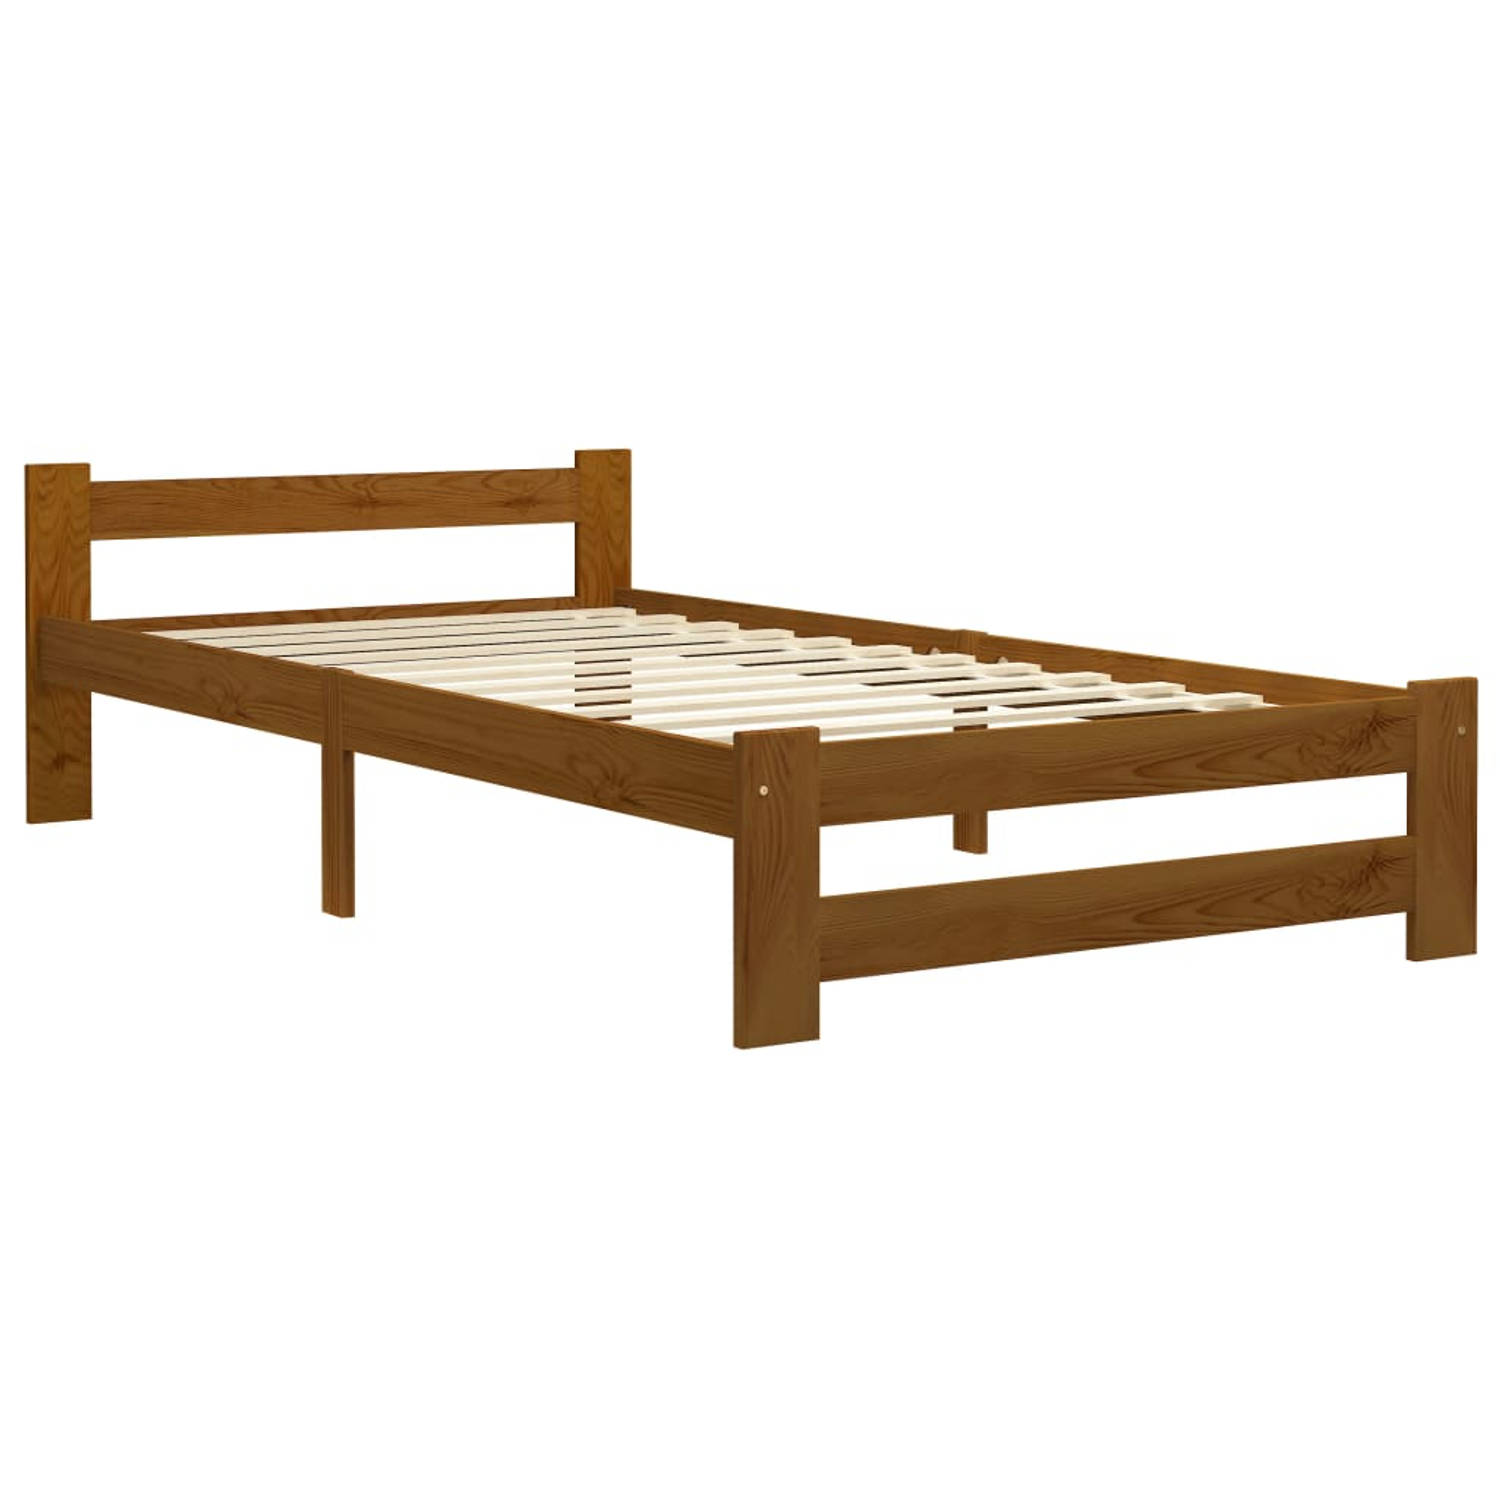 The Living Store Bedframe massief grenenhout honingbruin 90x200 cm - Bedframe - Bedframe - Bed Frame - Bed Frames - Bed - Bedden - 1-persoonsbed - 1-persoonsbedden - Eenpersoons Be